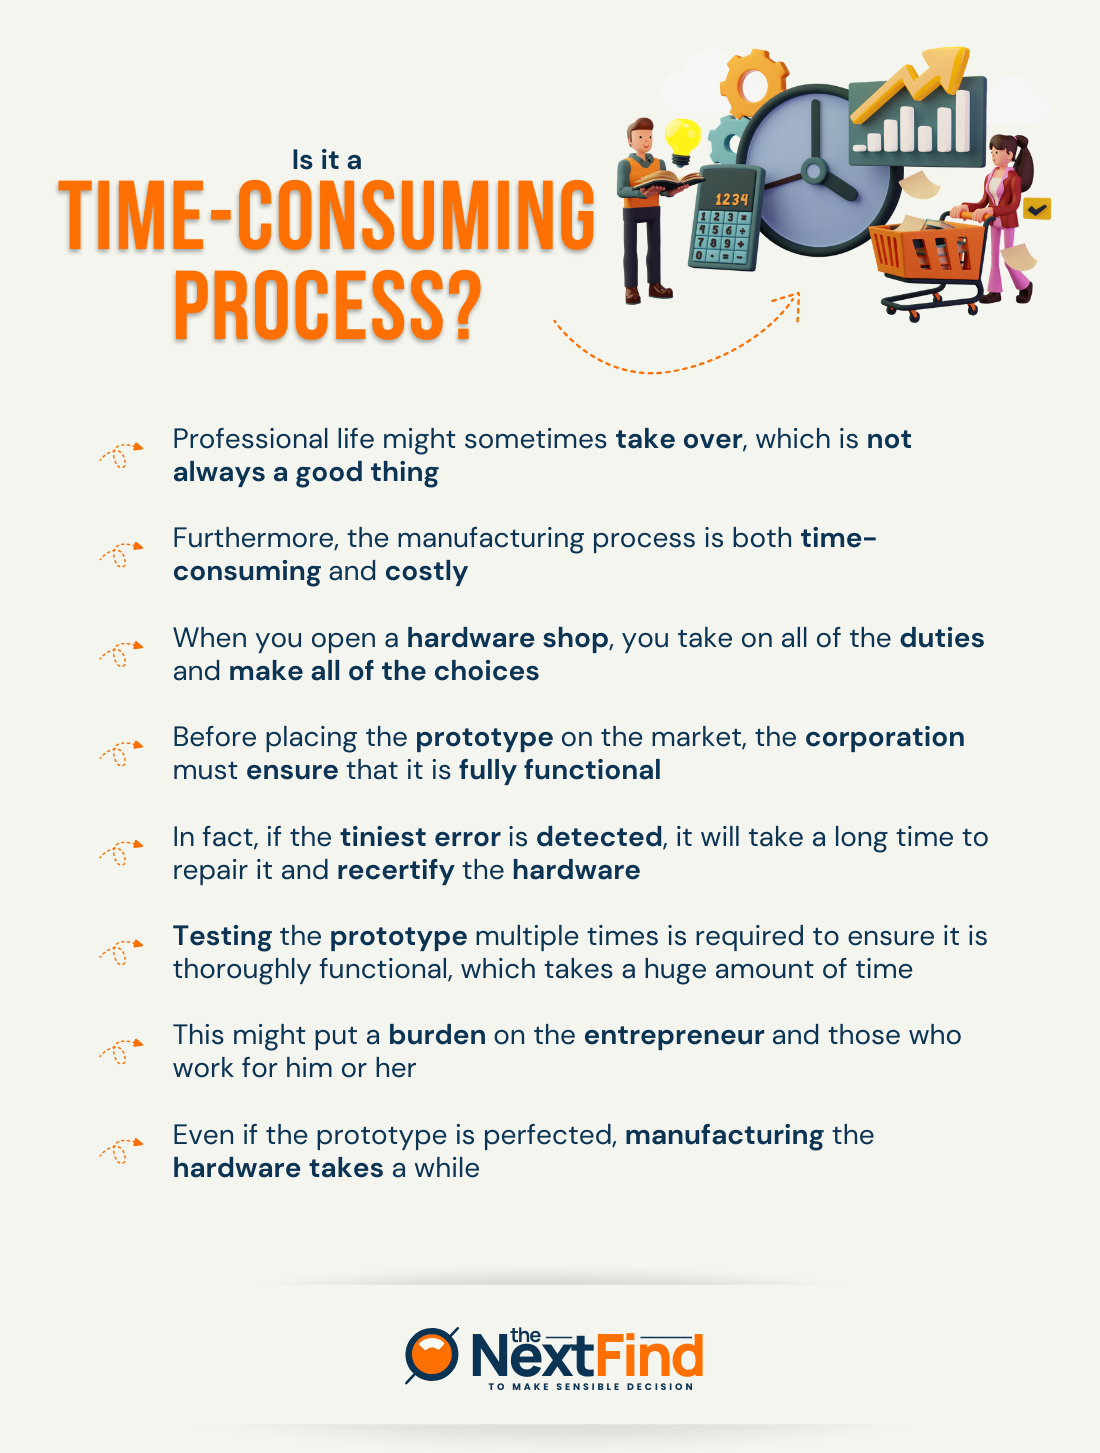 is it time-consuming process